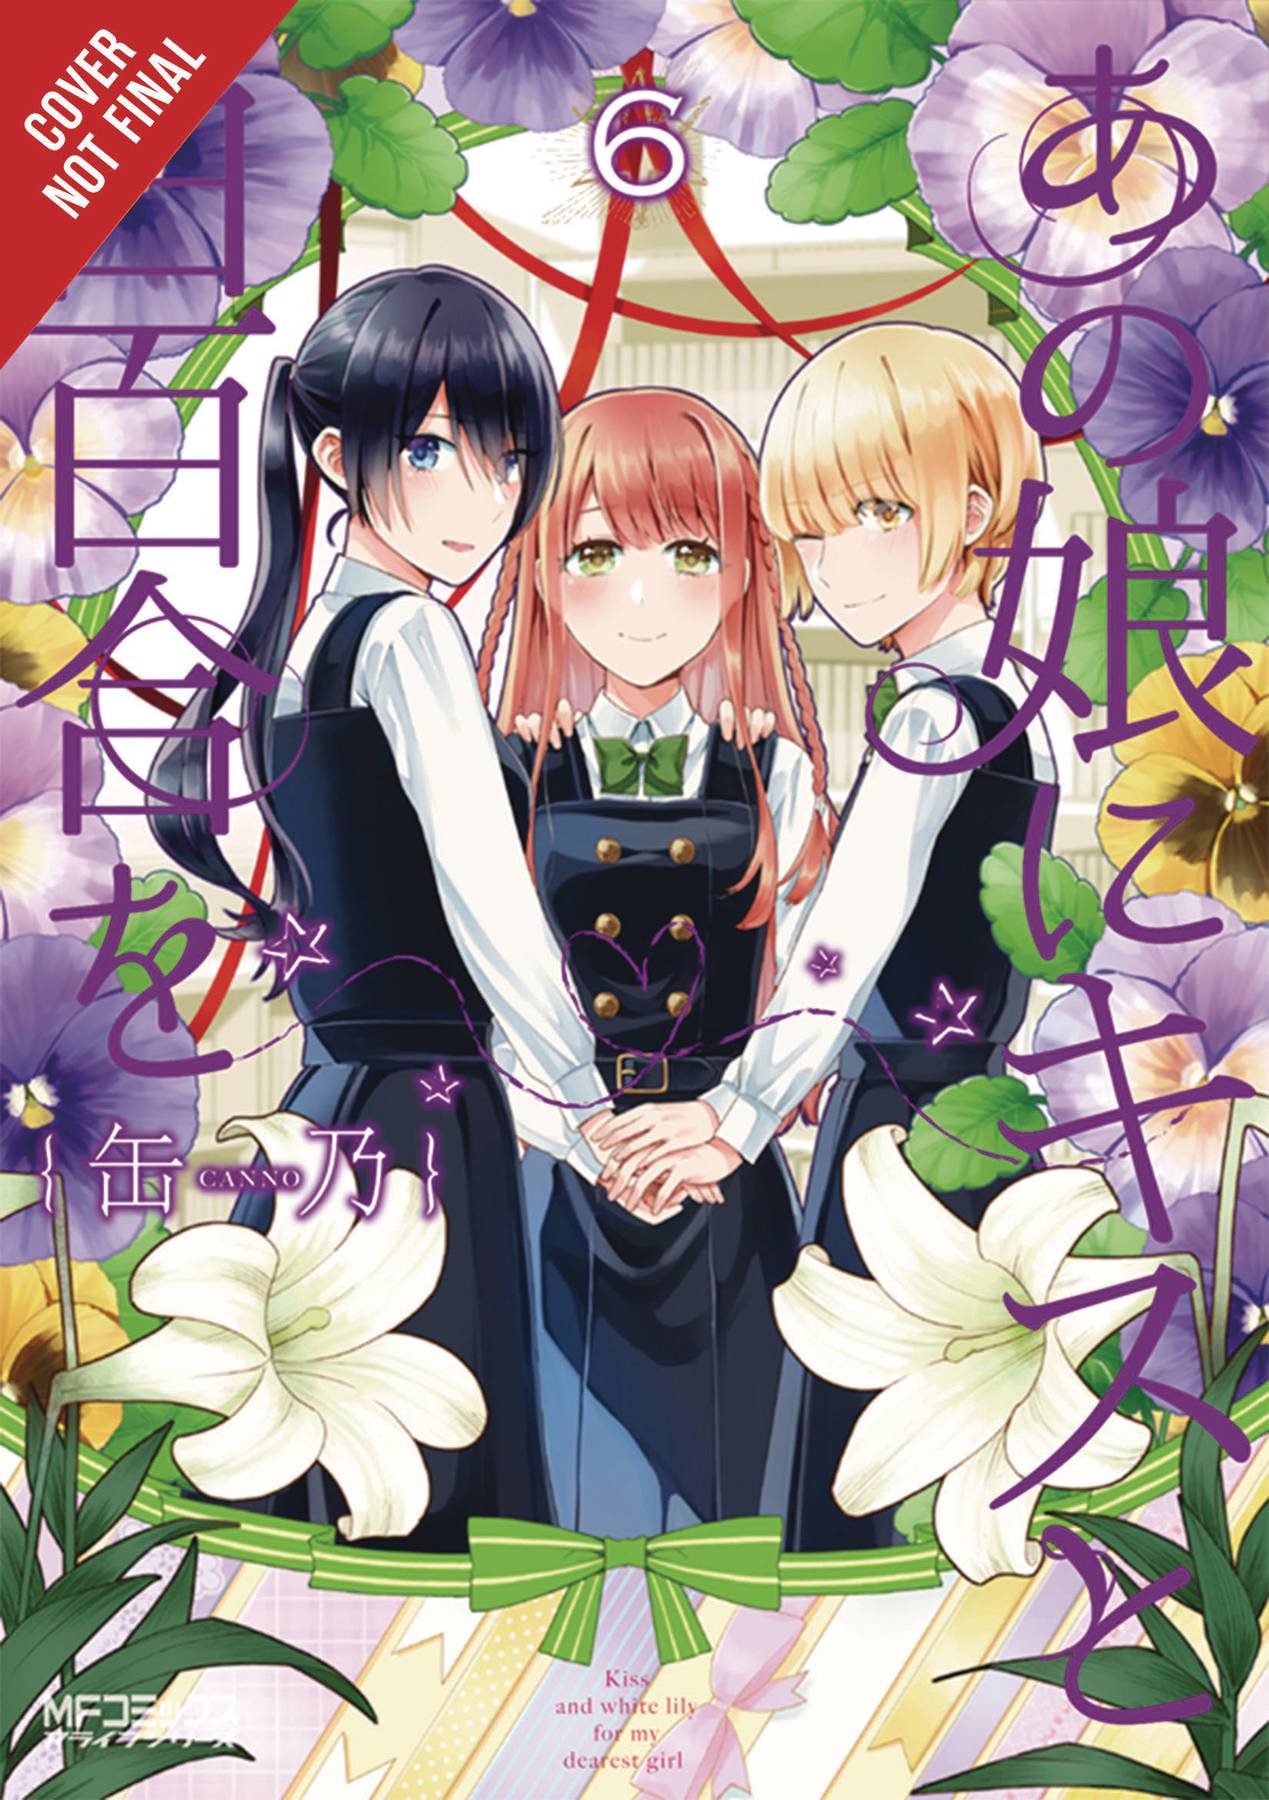 Kiss & White Lily For My Dearest Girl Vol. 06